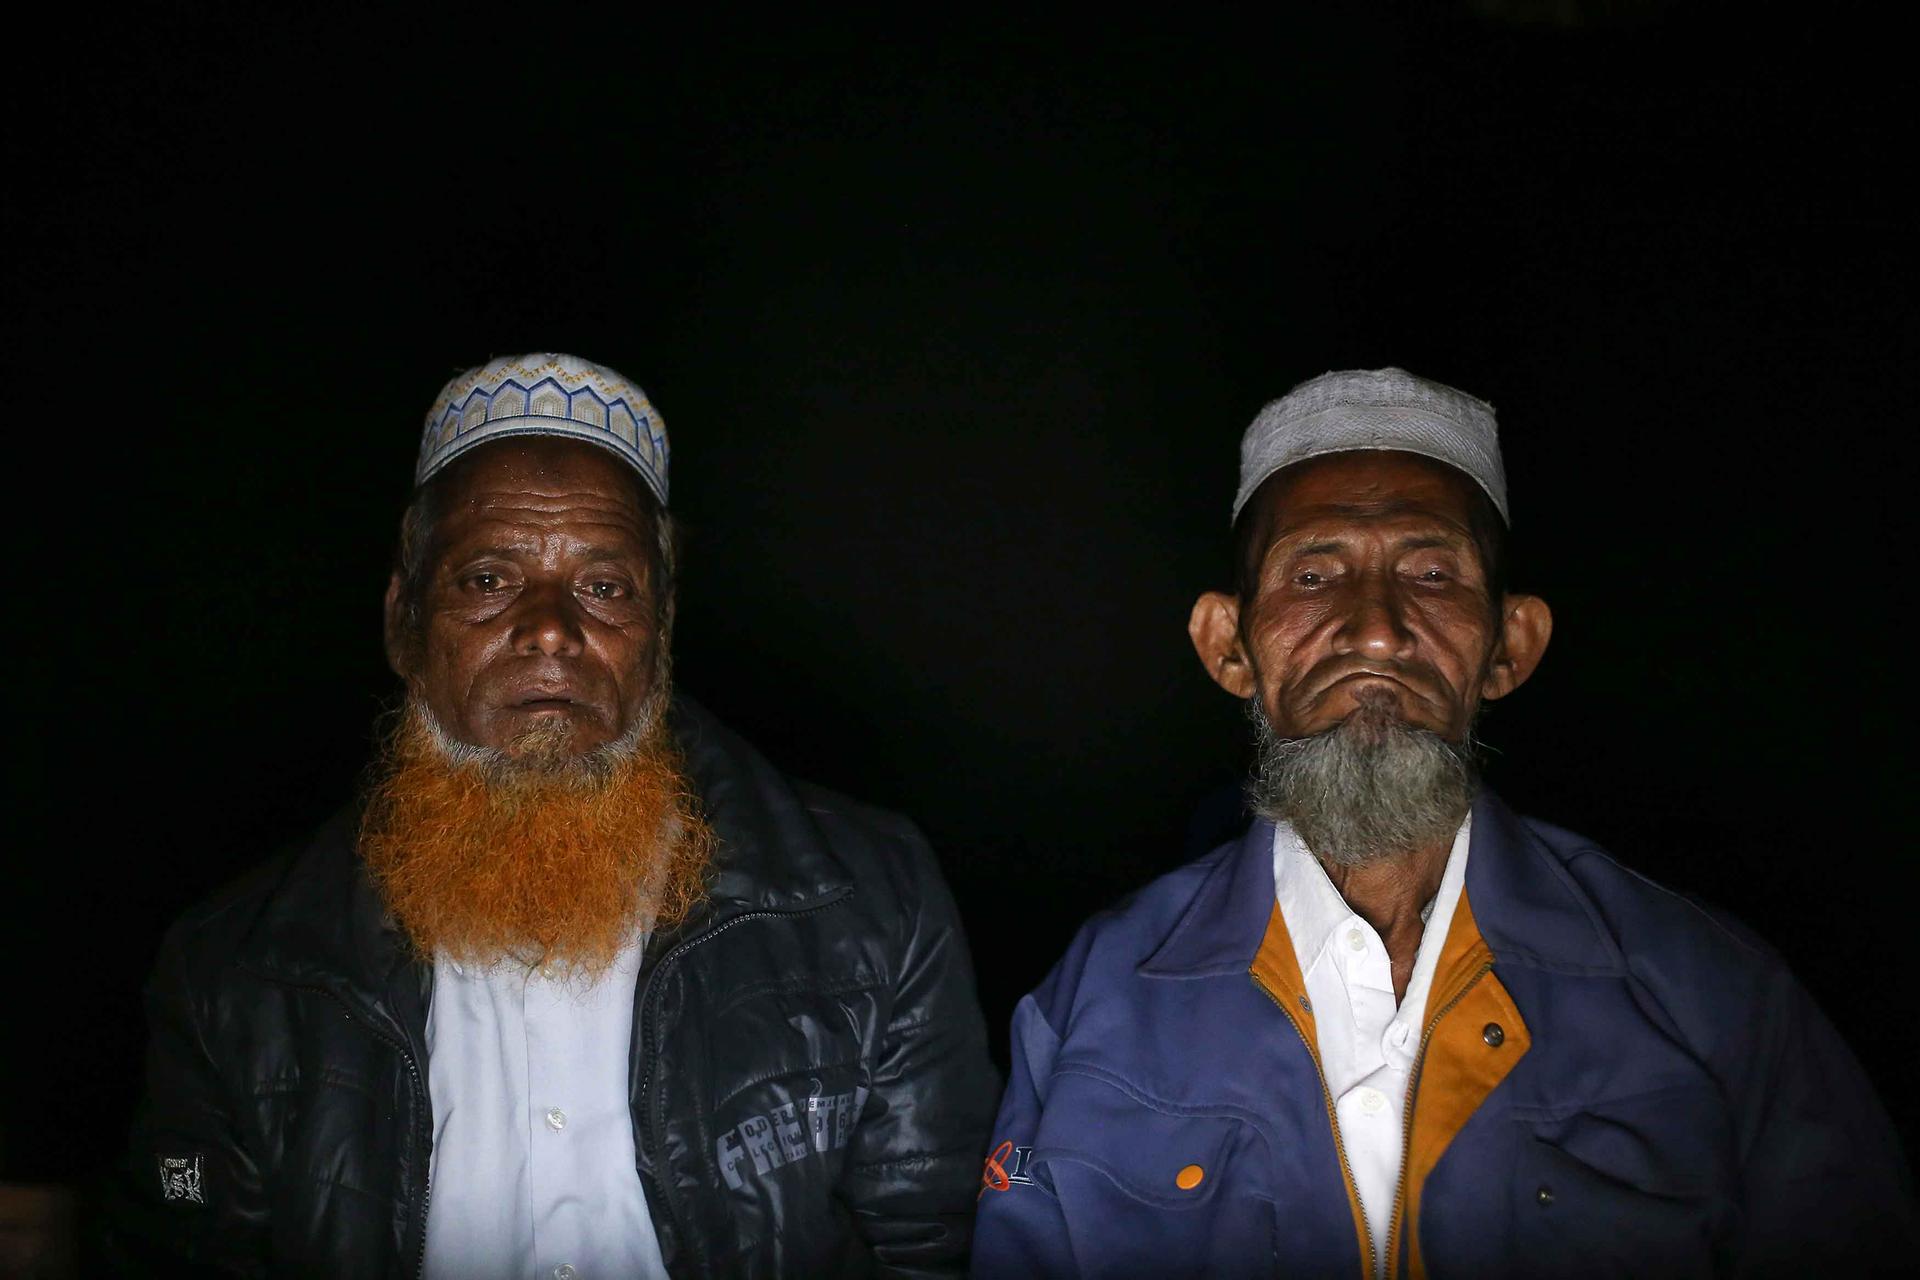 Muhammad Ali (L) and his cousin wait for the call to get through to Muhammad's son in Malaysia. The call never went through. Operators of the huts charge customers 10 cents a minute to talk to relatives who have left Rakhine State by boat to seek work ove